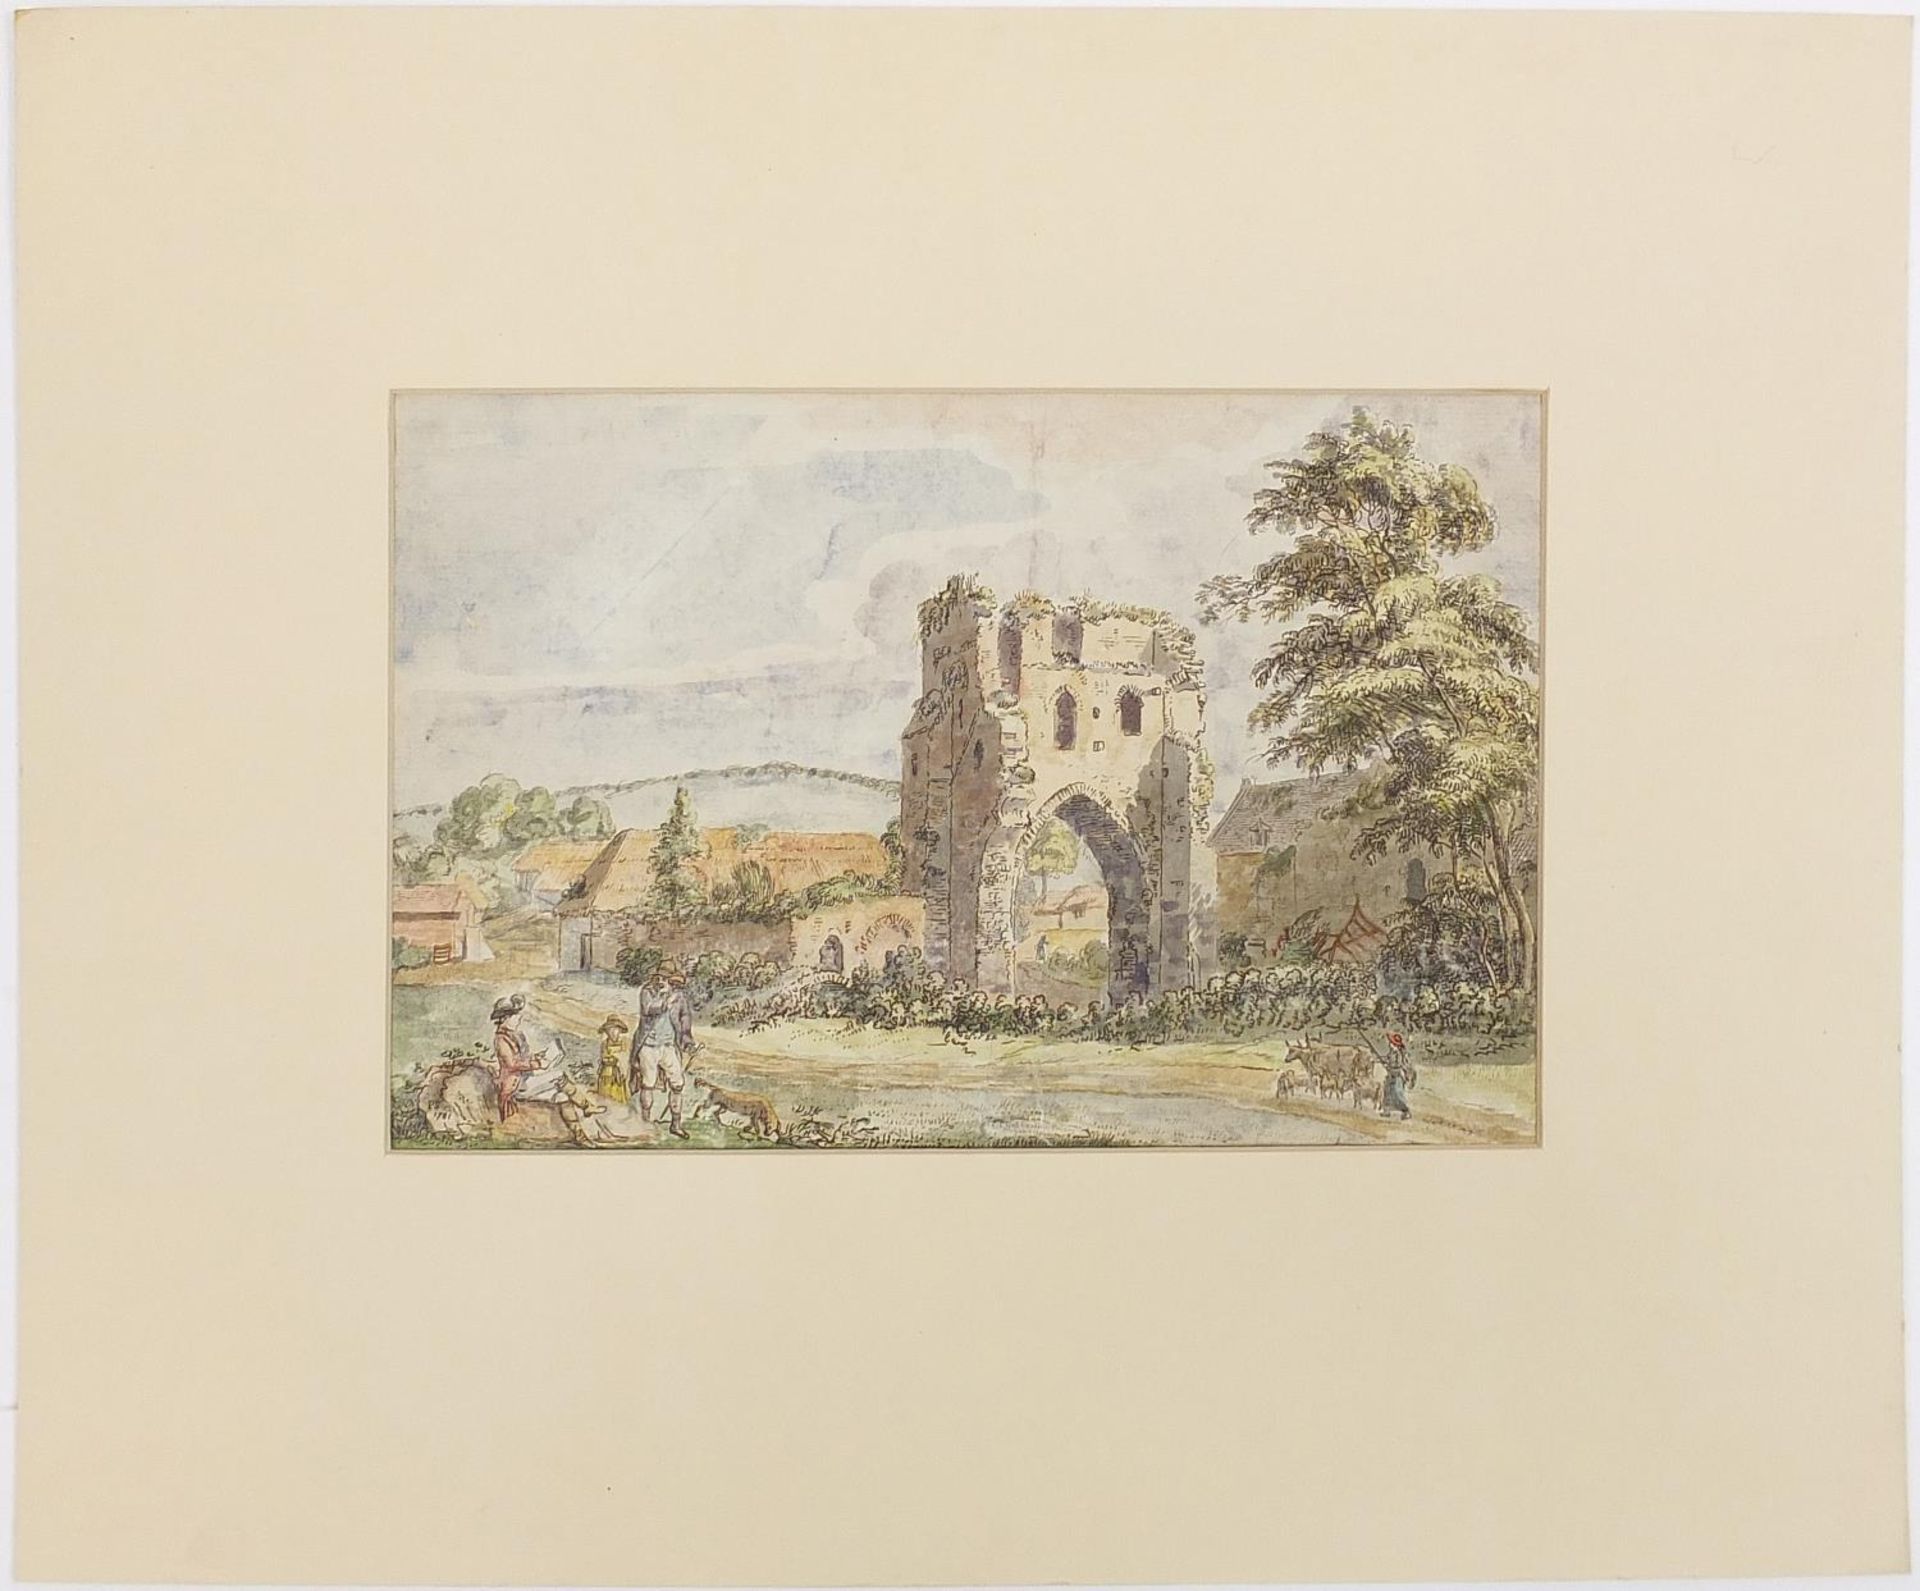 Paul Sandby 1781 - The Priory at Milford Haven, Wales, 18th century pen and watercolour on paper, - Image 2 of 4